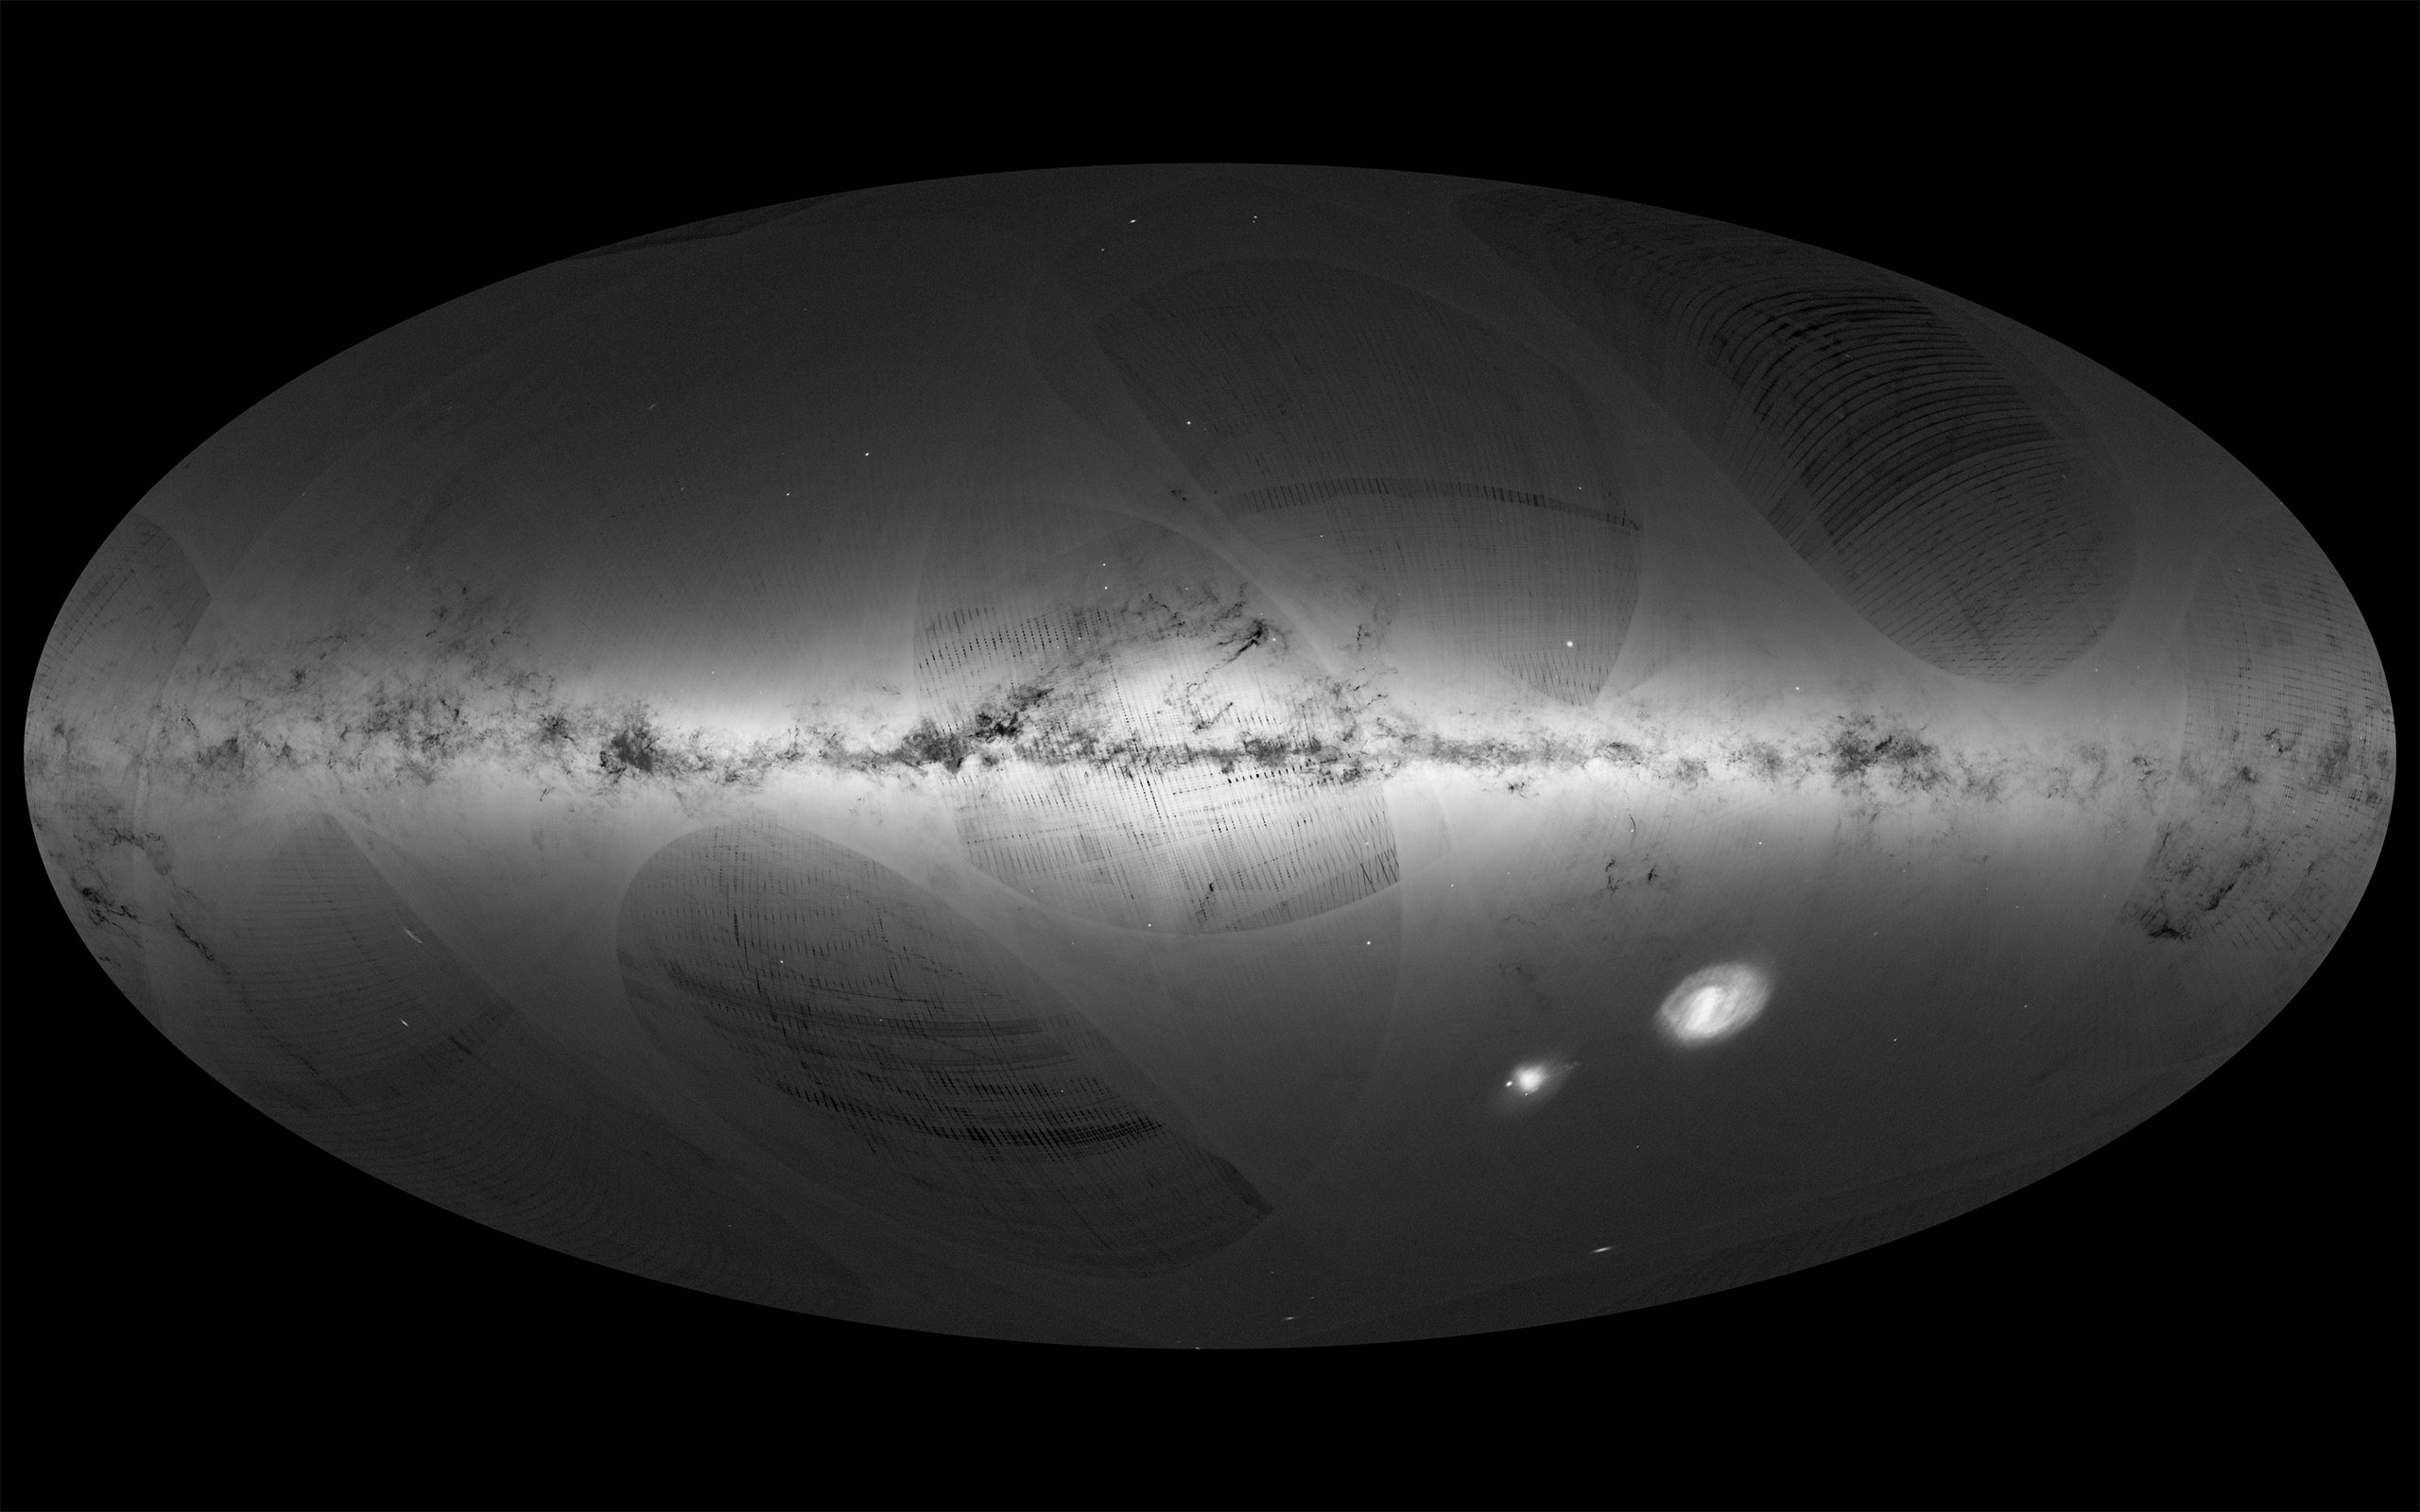 An all-sky view of stars in our Galaxy – the Milky Way – and neighboring galaxies, based on the first year of observations from ESA’s Gaia satellite, from July 2014 to Sept. 2015. Released Sept. 14, 2016.